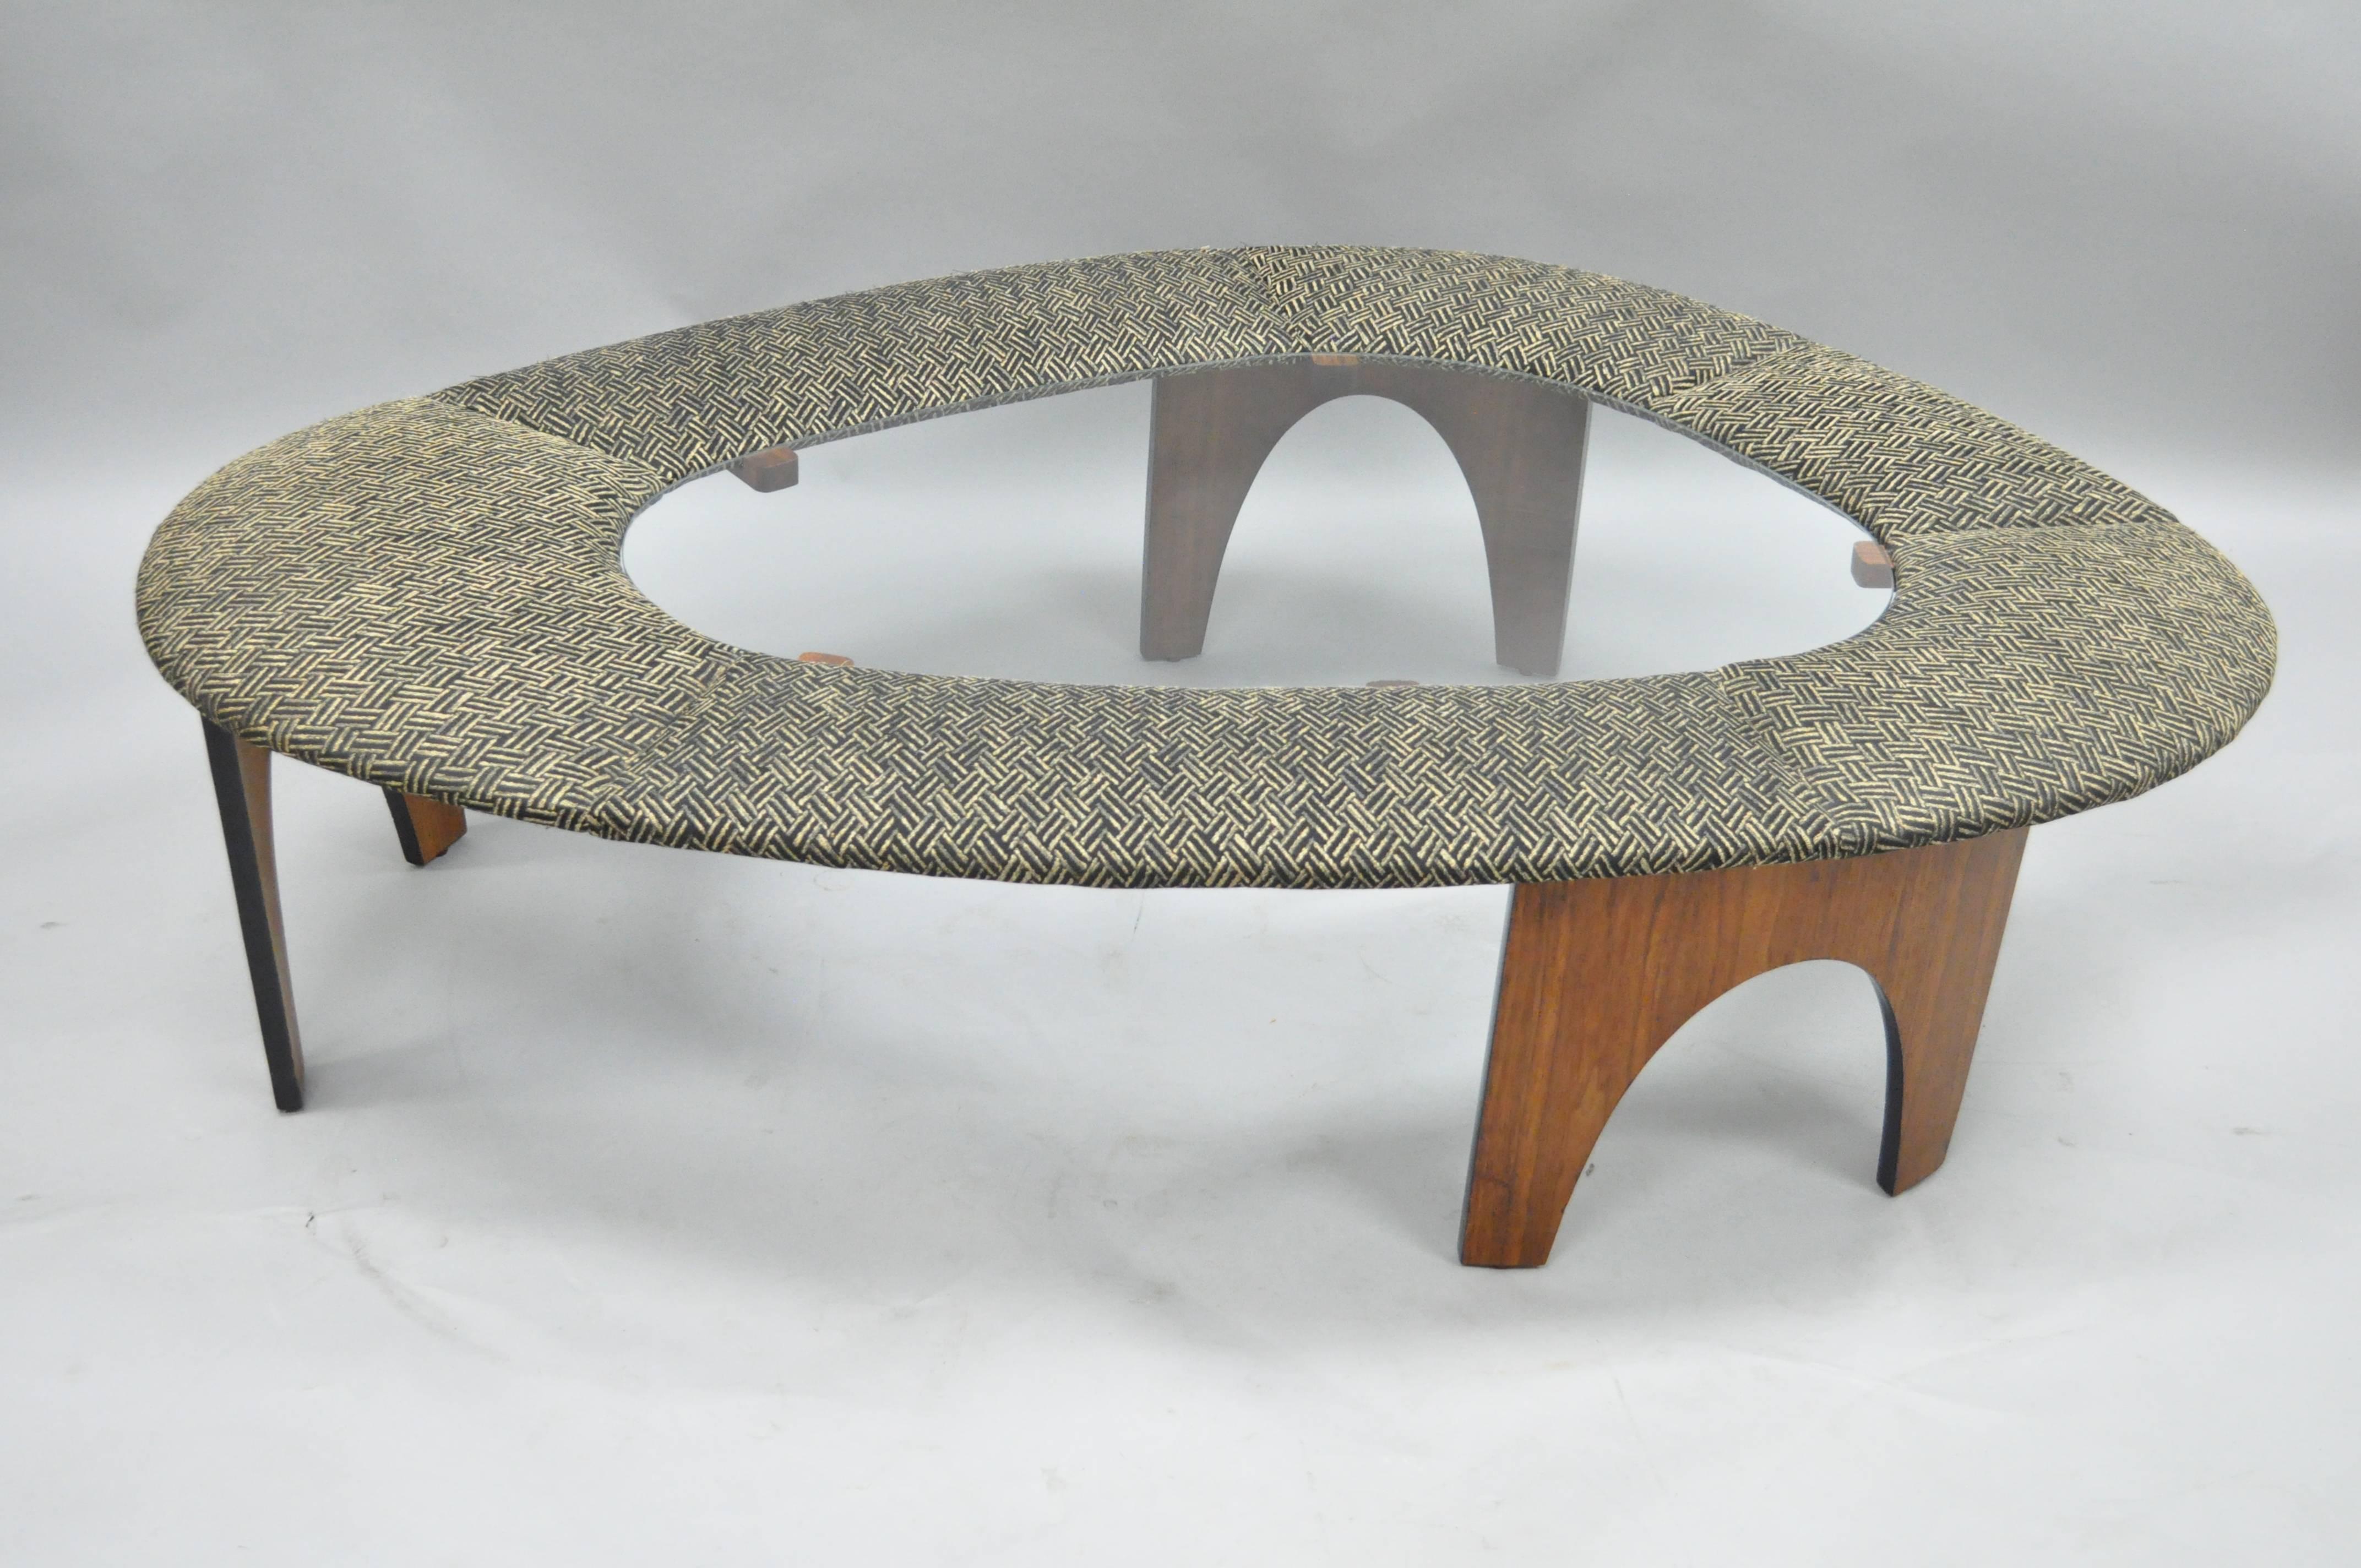 Veneer Henry P Glass Intimate Island Suite Walnut Upholstered Mid Century Coffee Table For Sale